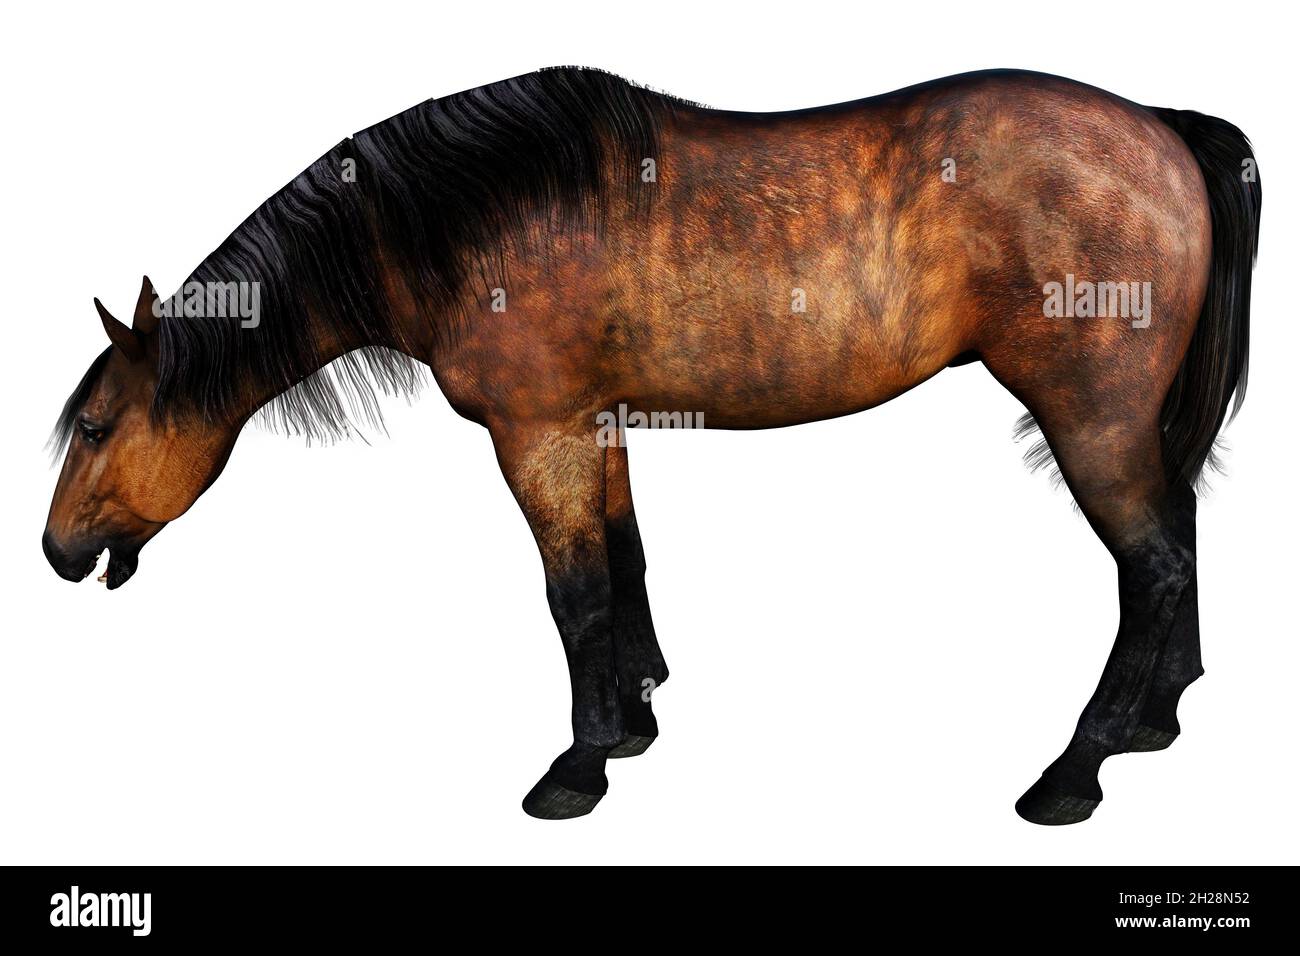 horse isolated, brown horse, horse, 3D illustration, horse 3D rendering, bay horse, horse standing Stock Photo